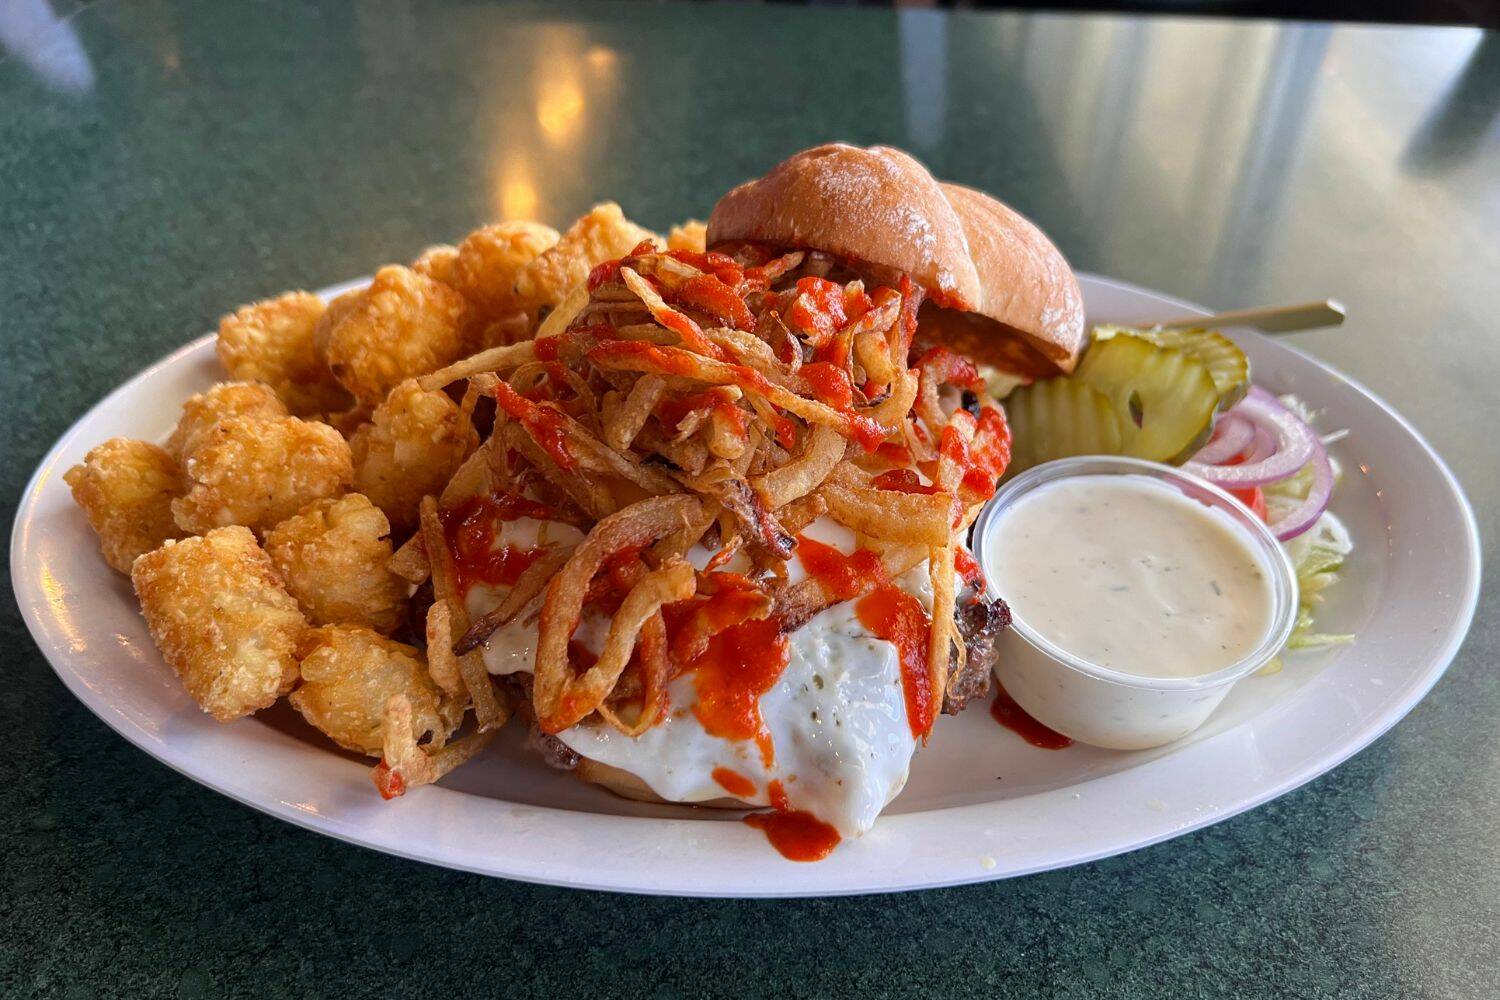 The Master Blaster Burger ($17.95) topped with pepper jack cheese, fried onions, a fried egg & drizzled with sriracha. Cameron Sheppard/ Renton Reporter